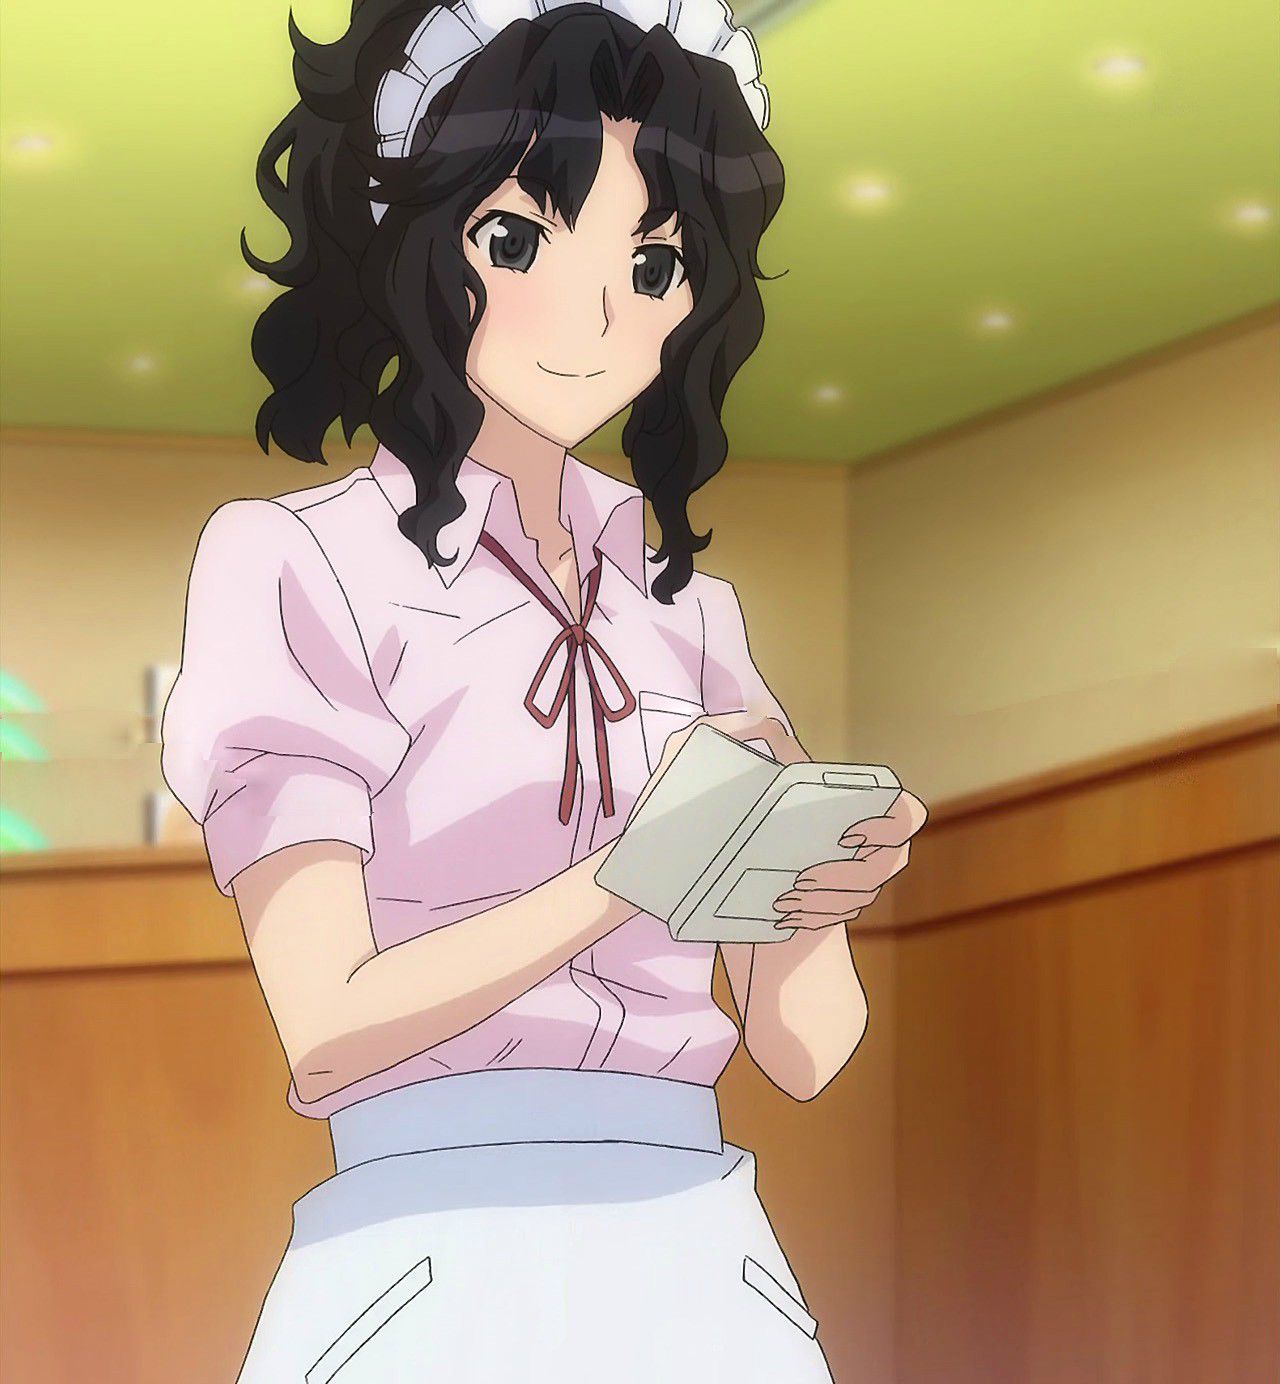 Cute characters "amagami" transcendence erotic illustrations images of the wwwwwww 17